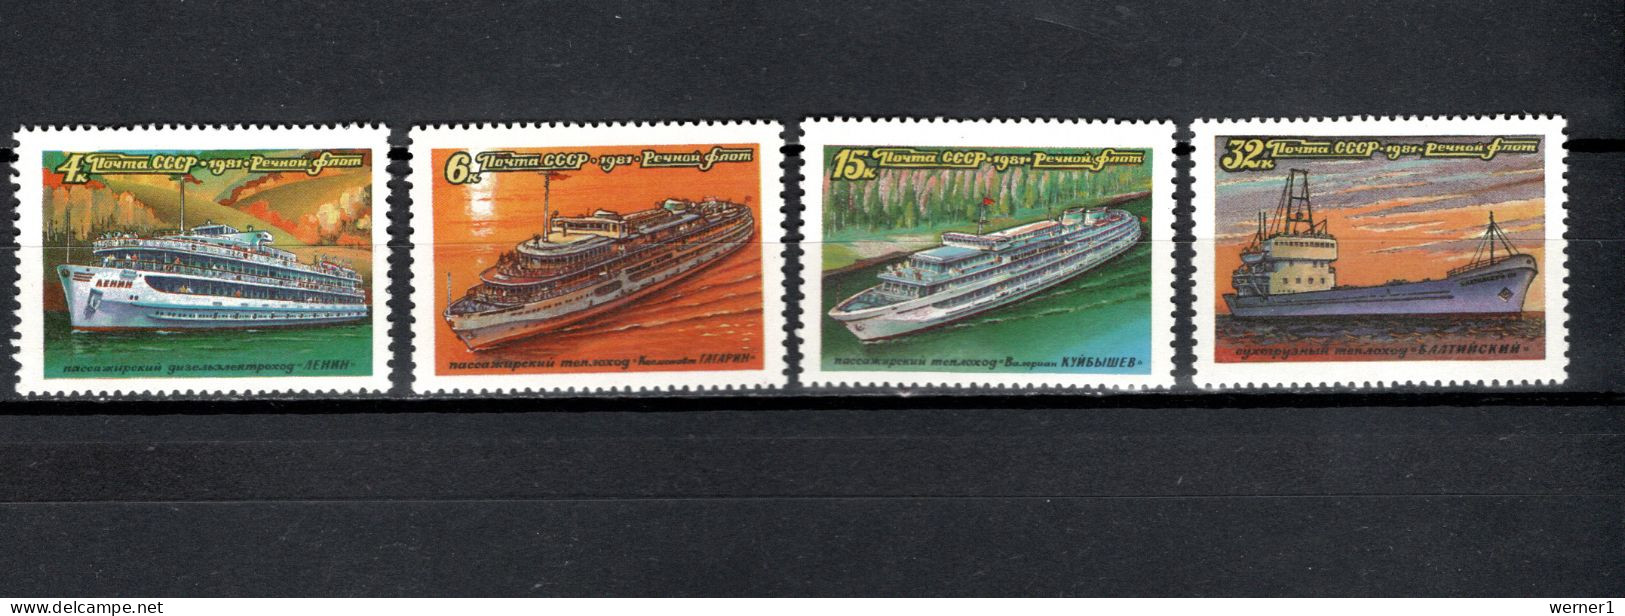 USSR Russia 1981 Space, Ships Set Of 4 MNH - Russie & URSS